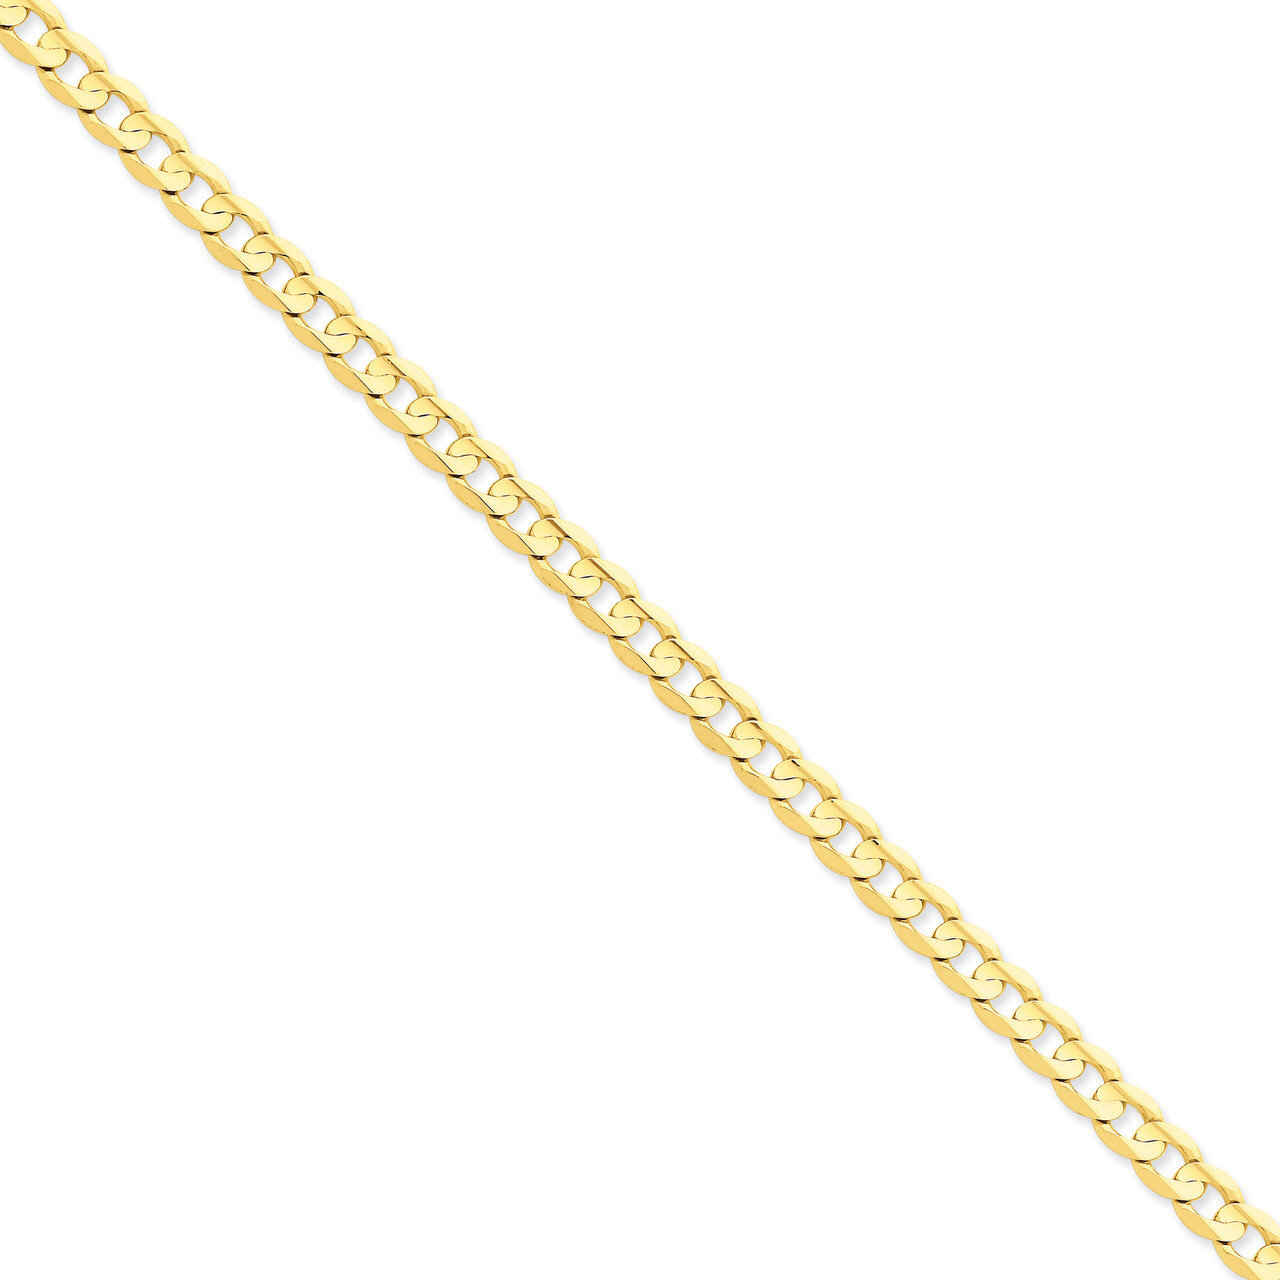 6.75mm Open Concave Curb Chain 7 Inch 14k Gold LCR180-7